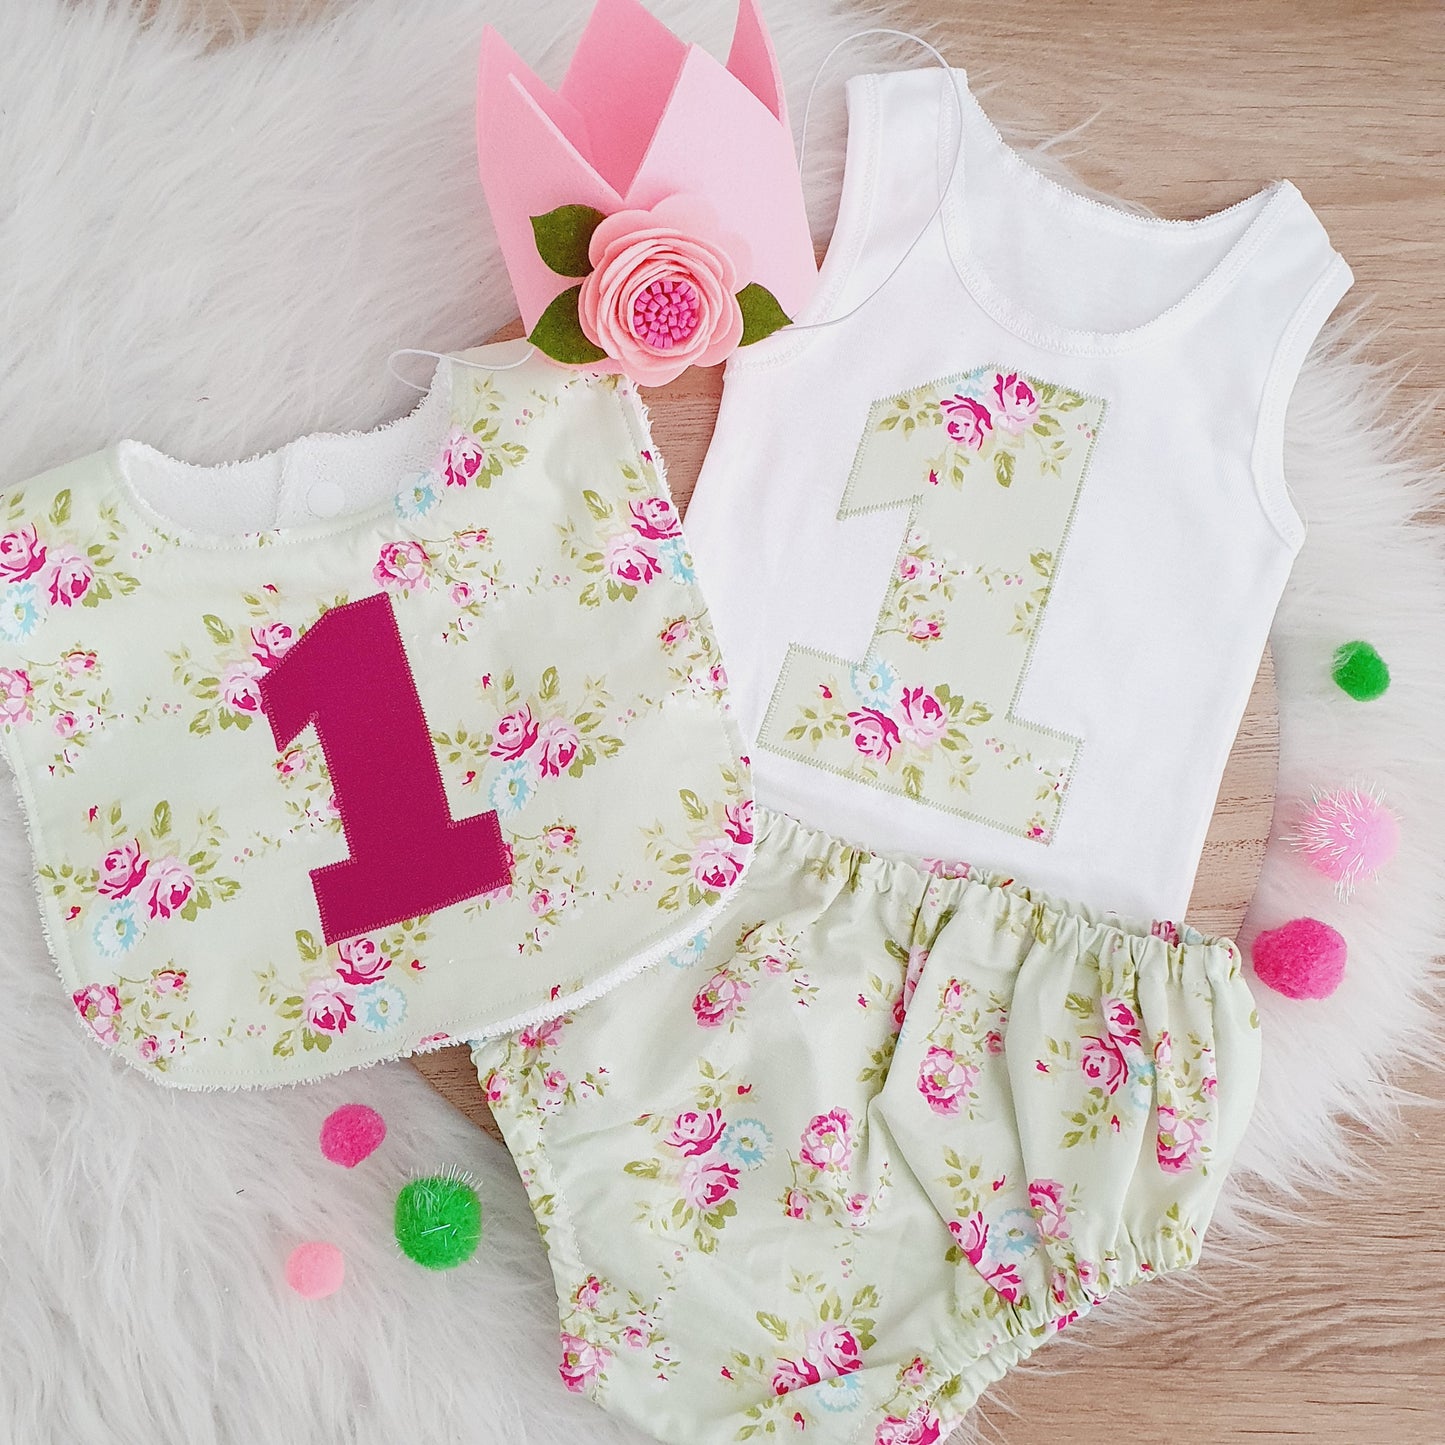 Girls 1st Birthday Outfit - Cake Smash Outfit, Size 1, Nappy Cover, Birthday Bib, Crown & Singlet Set, GREEN & PINK FLORAL